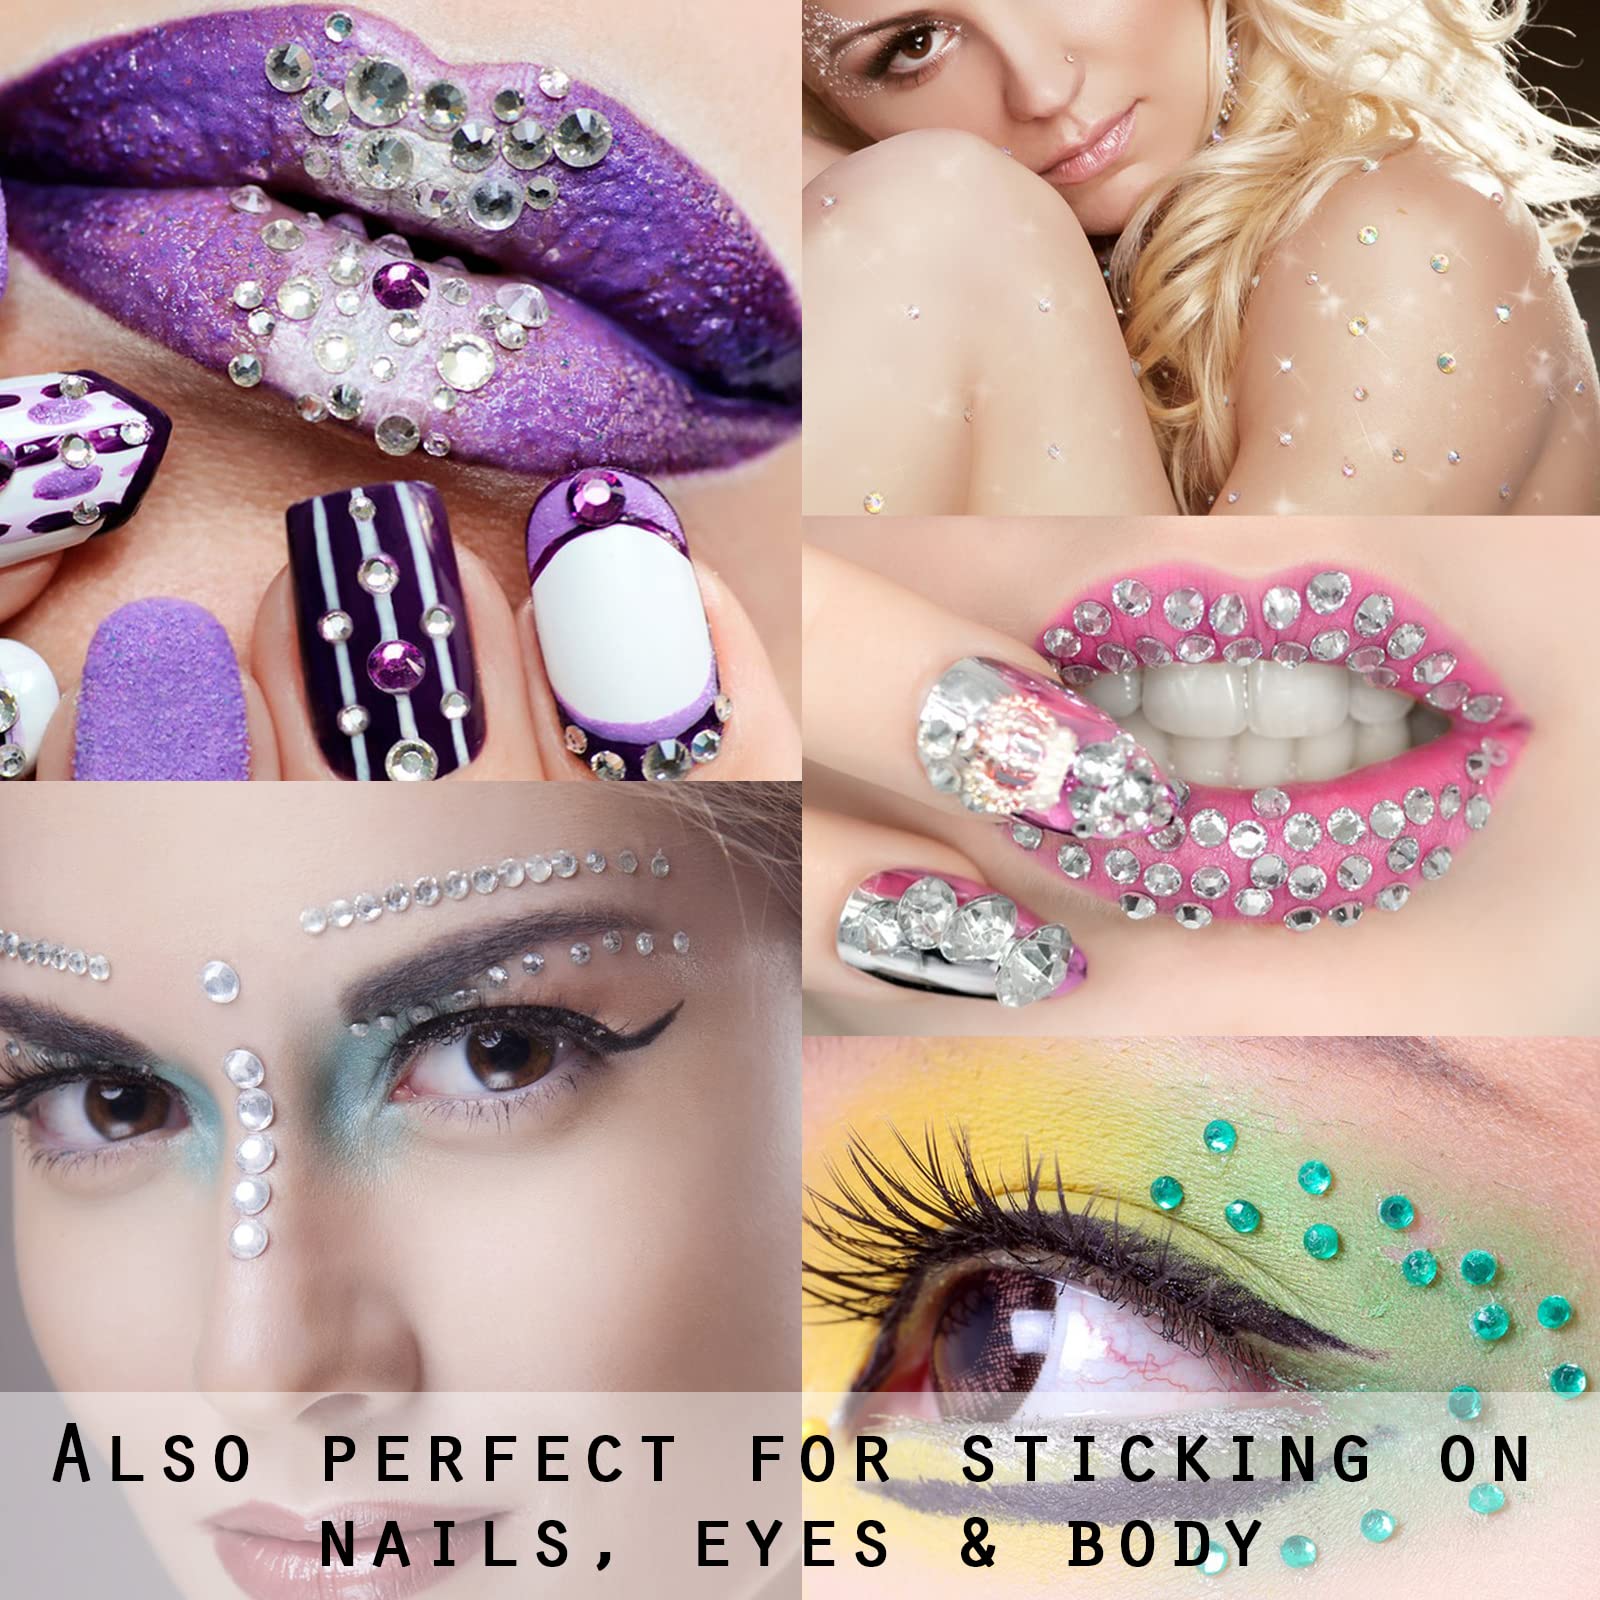 NIACONN 1320pcs Mixed Color Hair Gems Stick on, Bling Face Diamonds Self Adhesive Rhinestones Stickers for Hair, Face & DIY